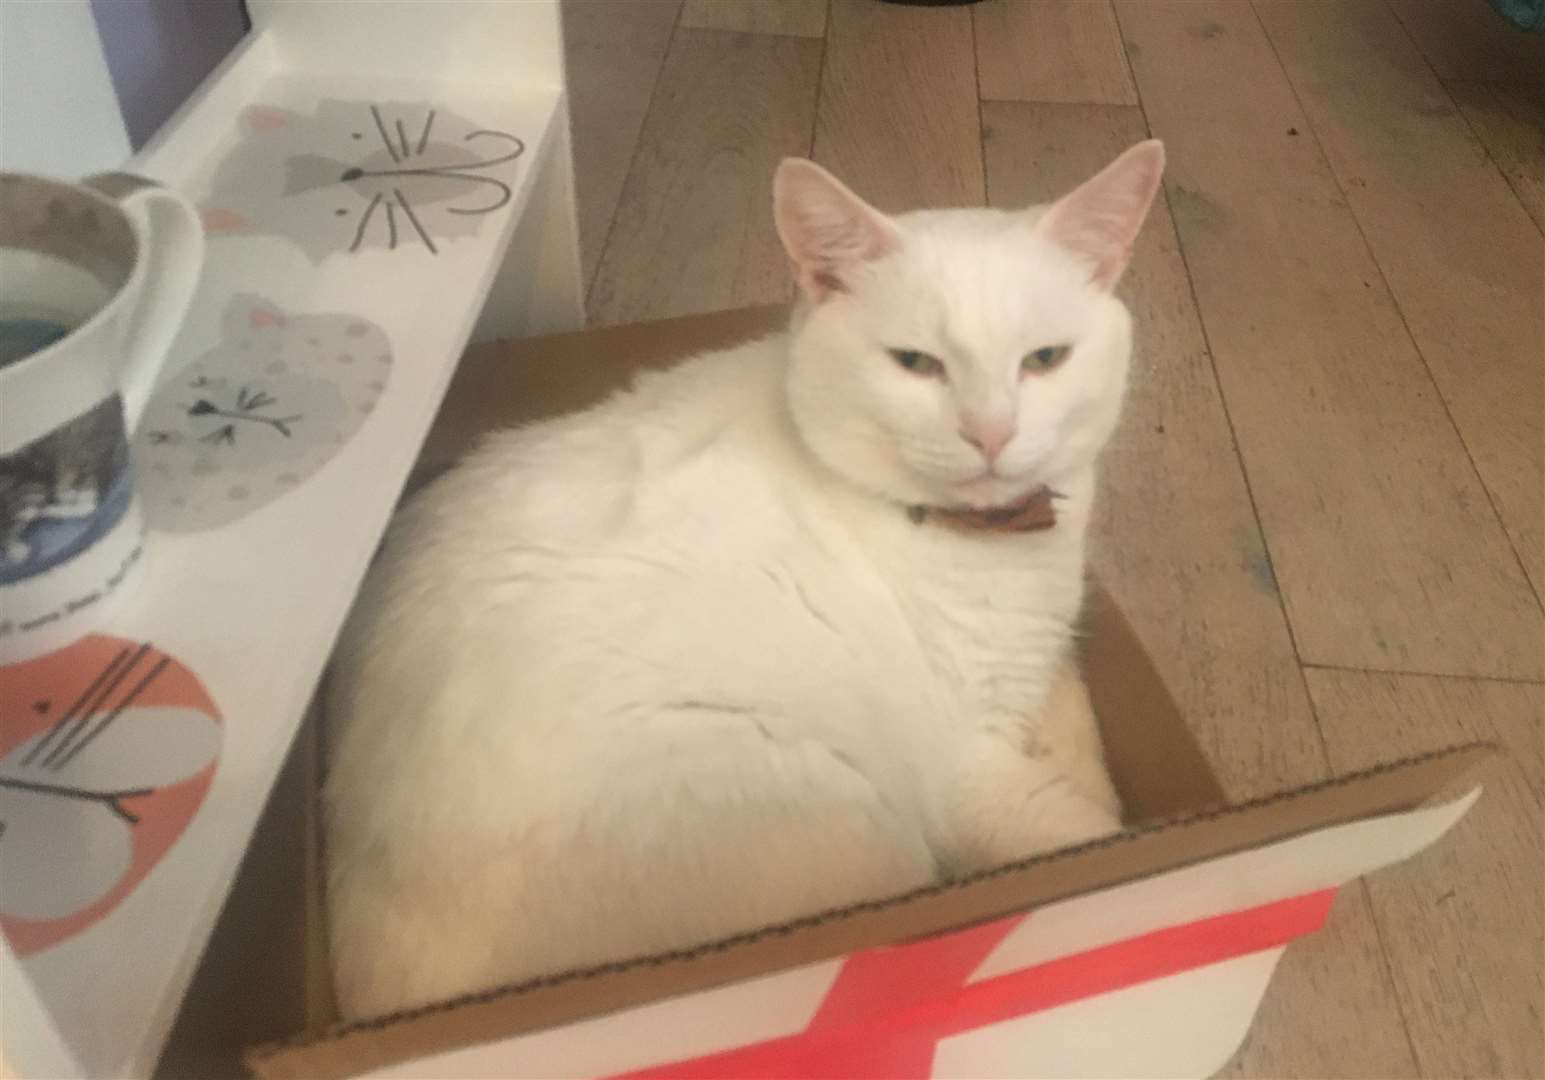 Frank, the deaf white cat greets visitors to Paws Cat Cafe